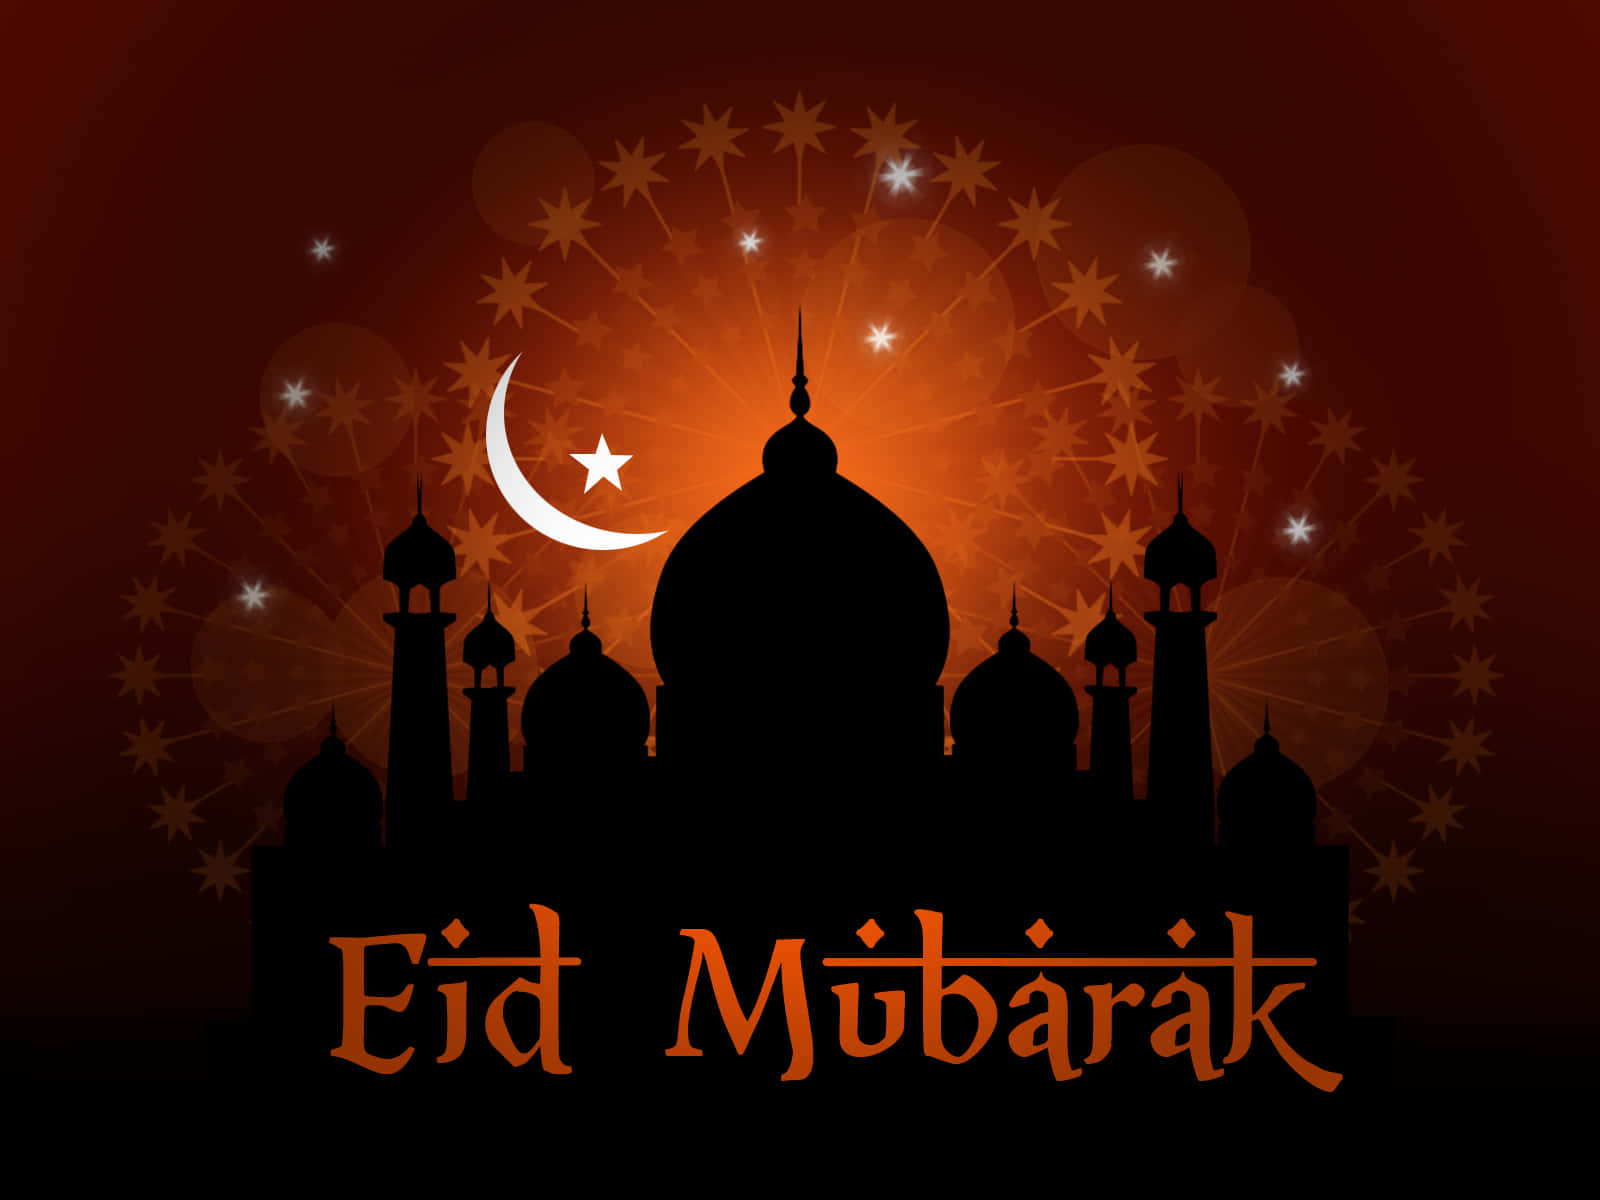 Celebrate the joy of Eid with family and friends